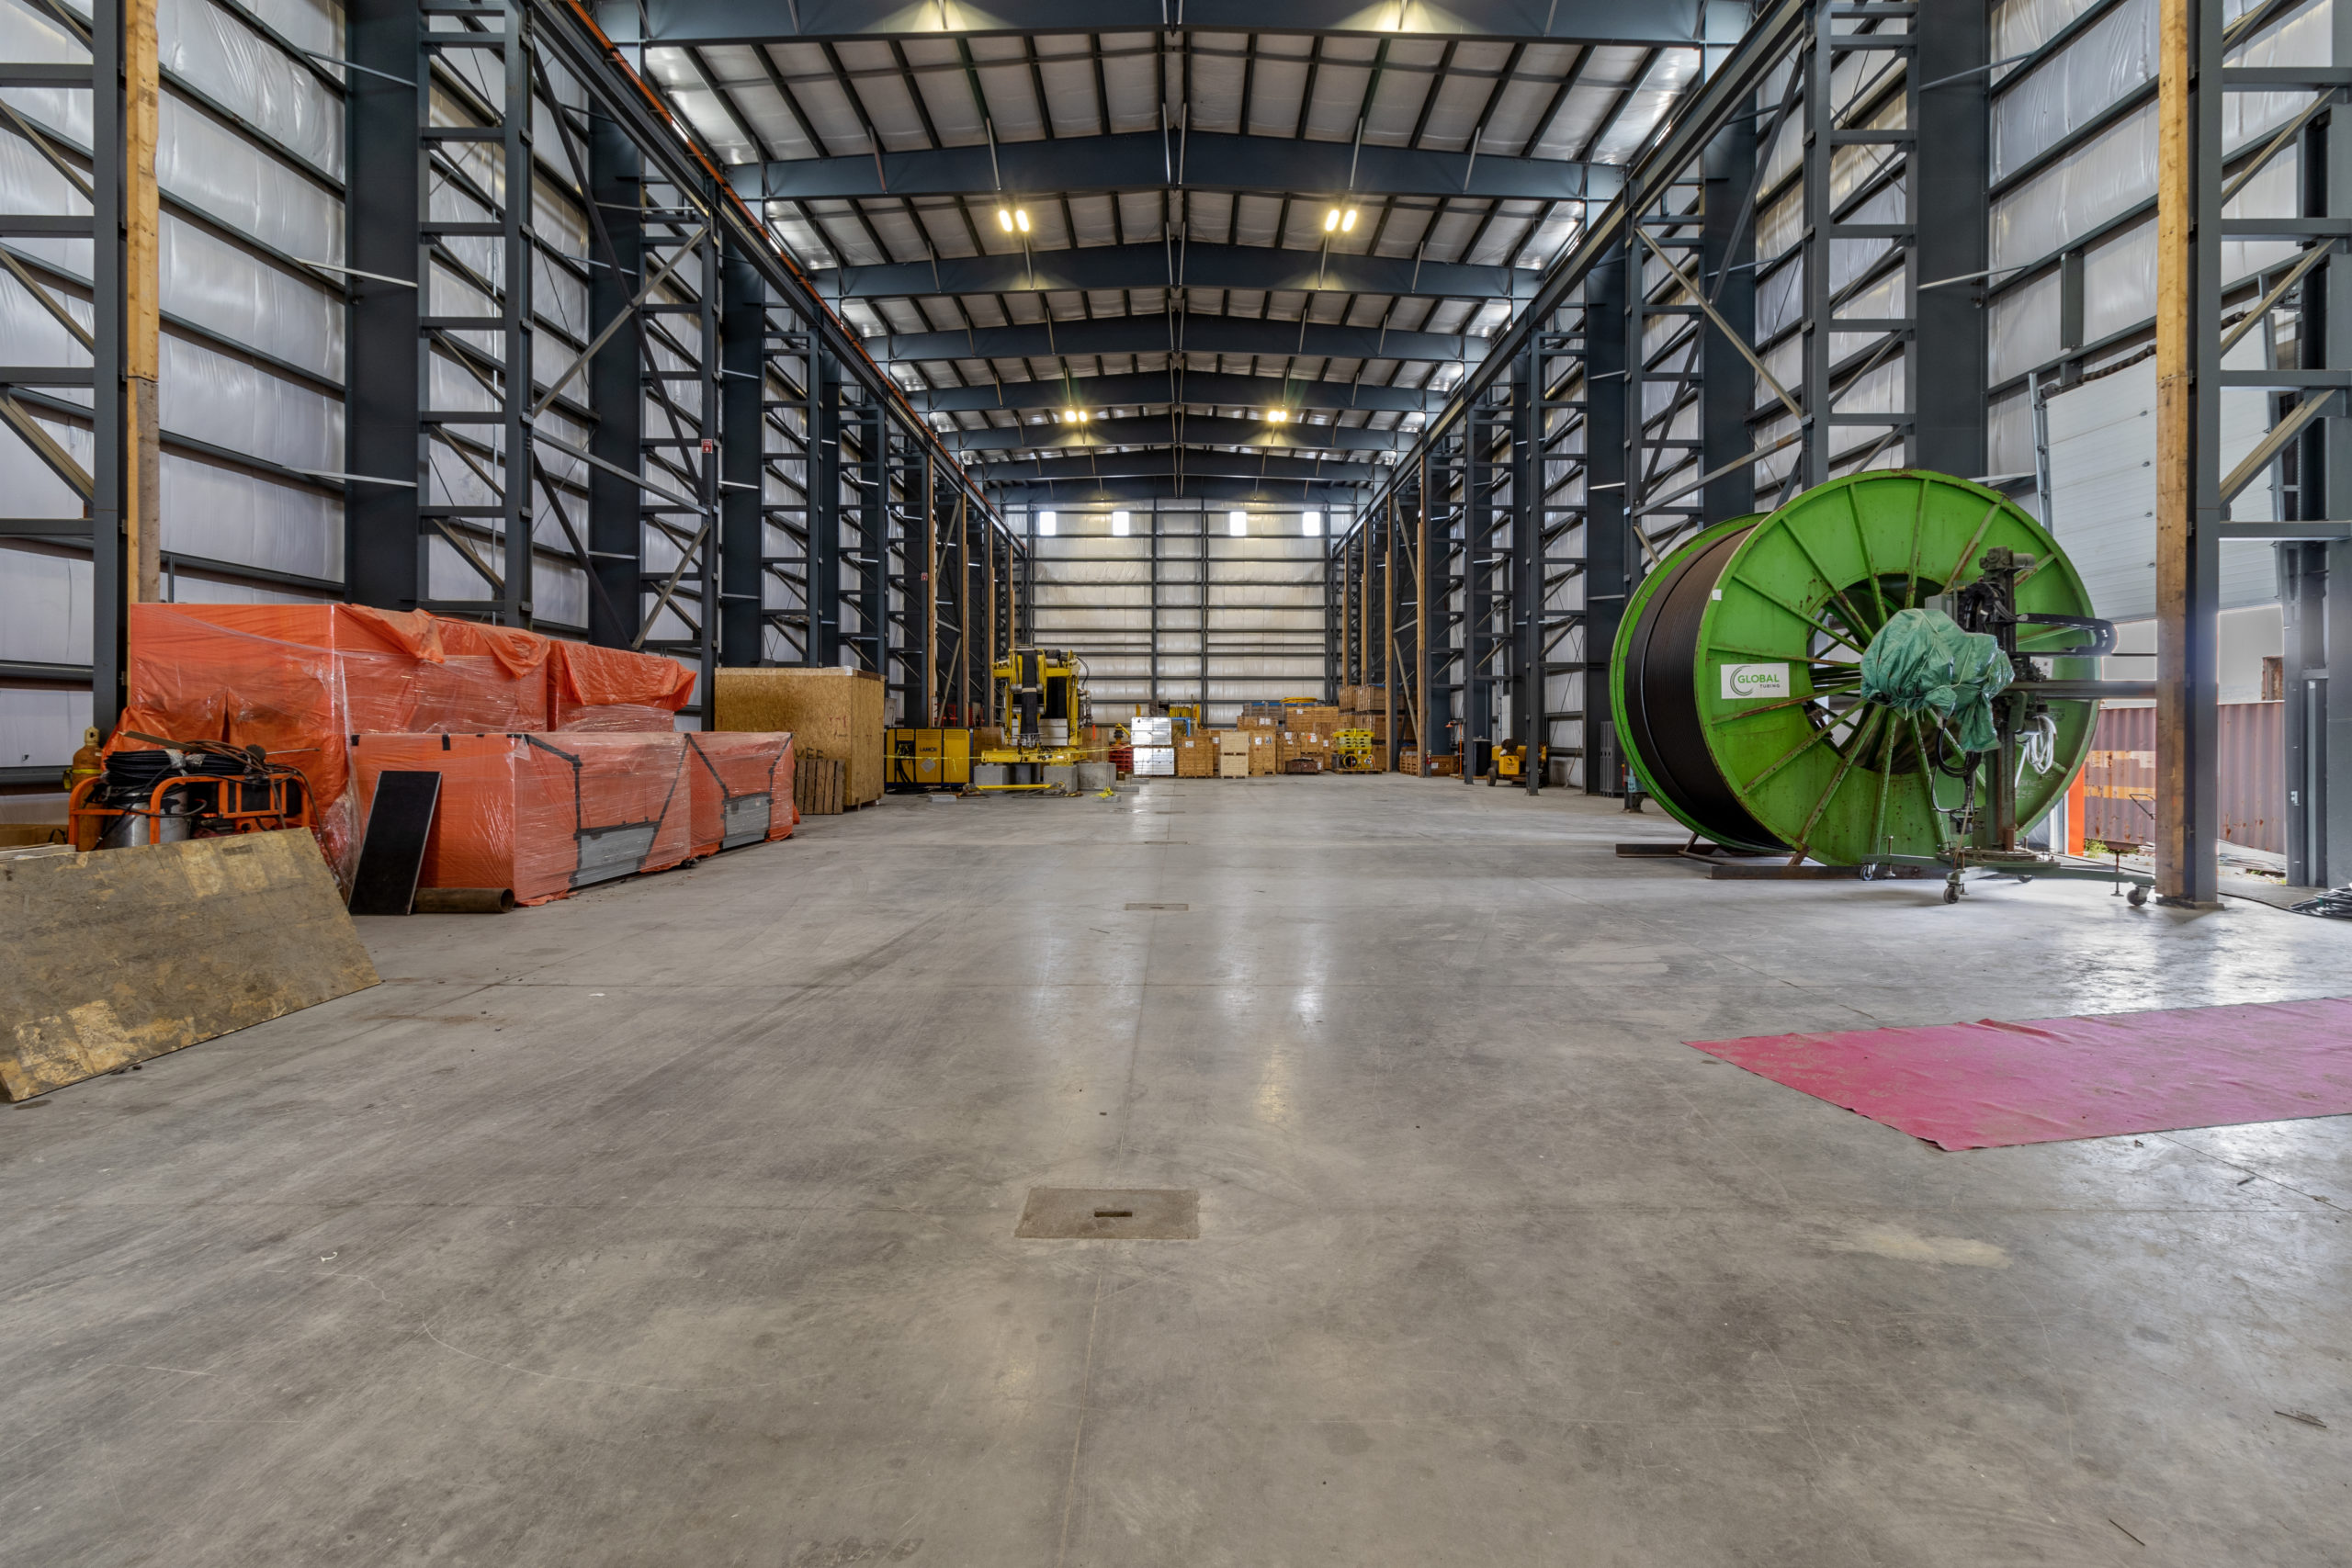 Interior of warehouse, clear span and open space